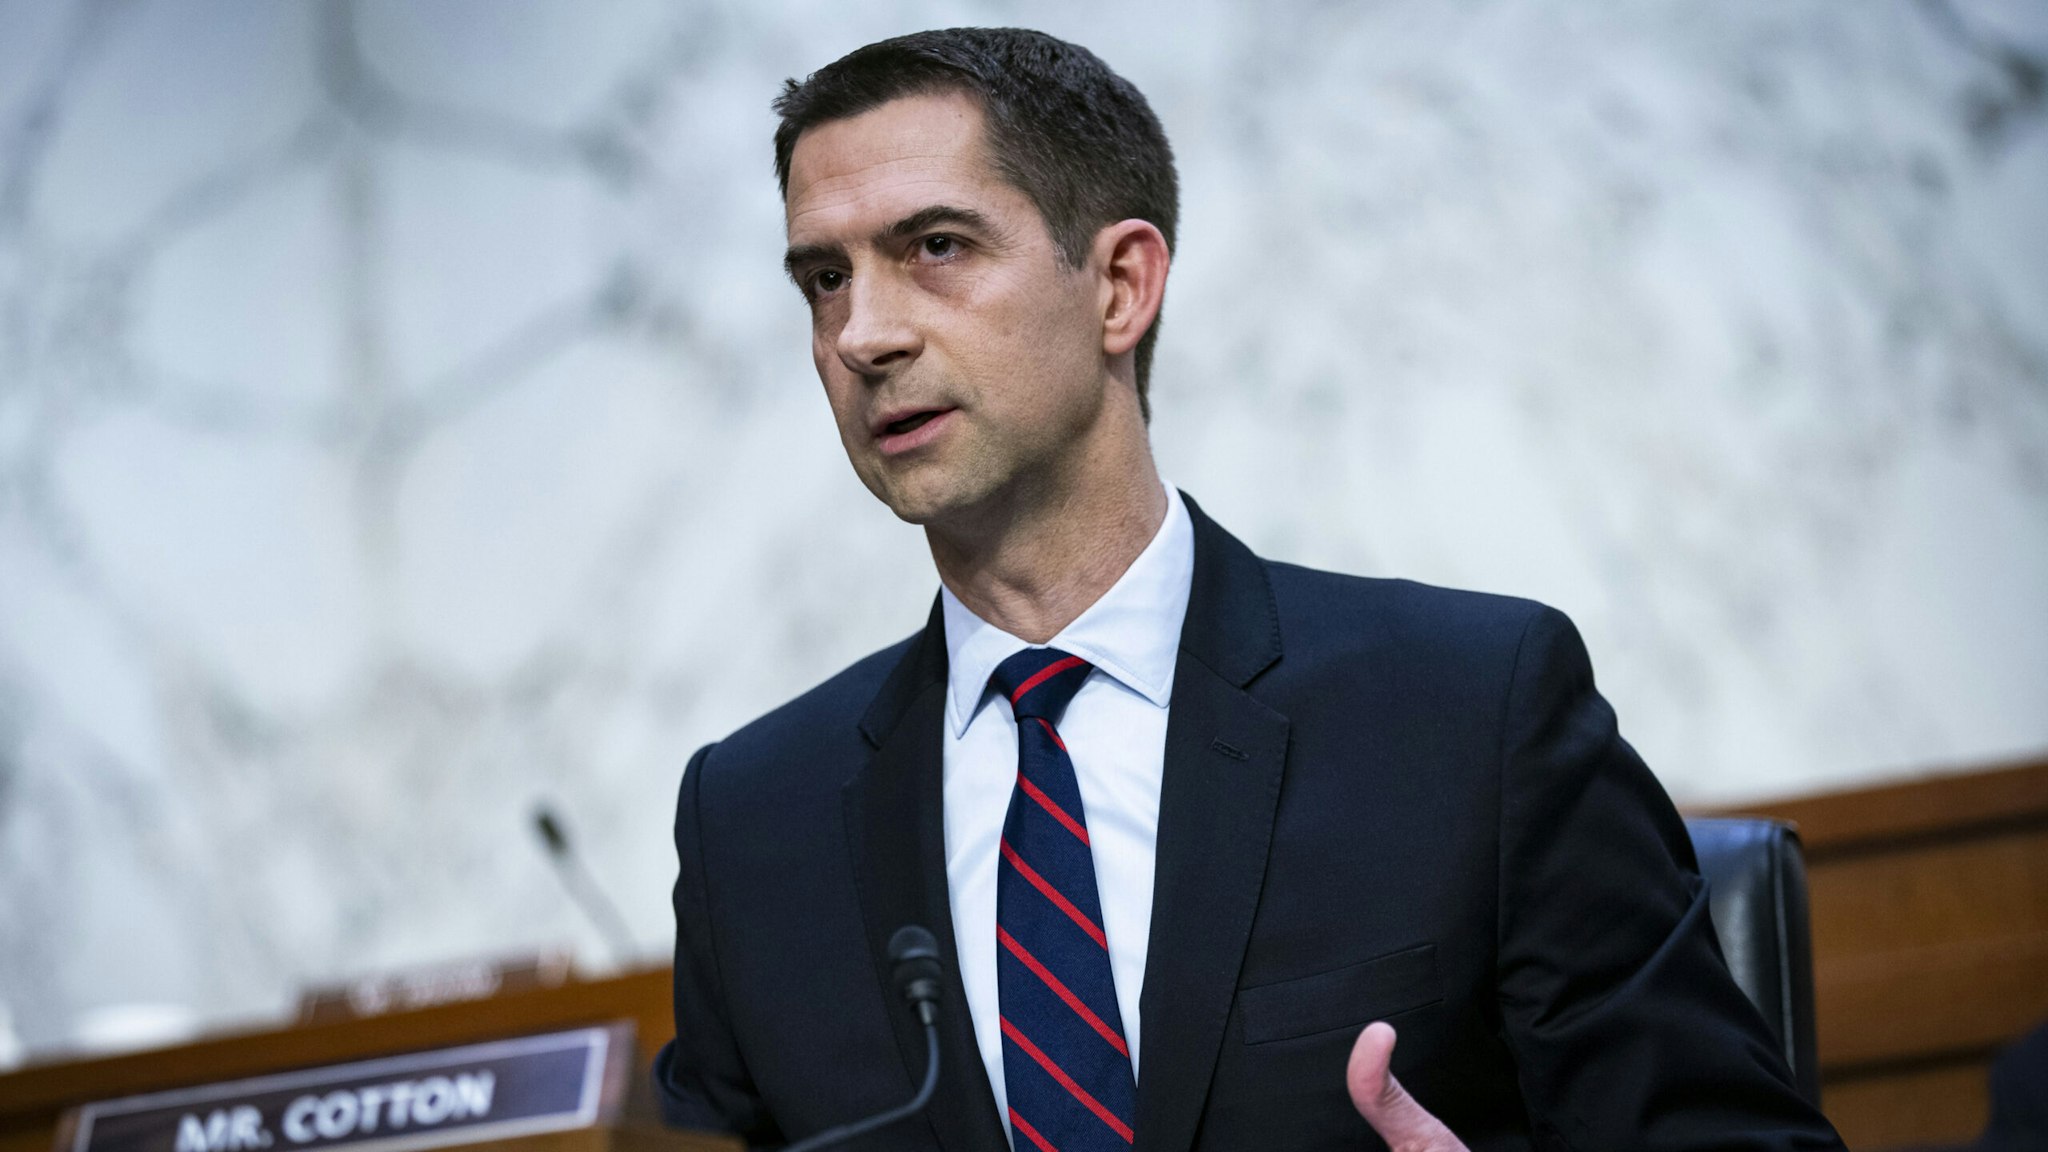 Senator Tom Cotton, a Republican from Arkansas, speaks during a Senate Judiciary Committee confirmation hearing for Ketanji Brown Jackson, associate justice of the U.S. Supreme Court nominee for U.S. President Joe Biden, in Washington, D.C., U.S., on Tuesday, March 22, 2022.